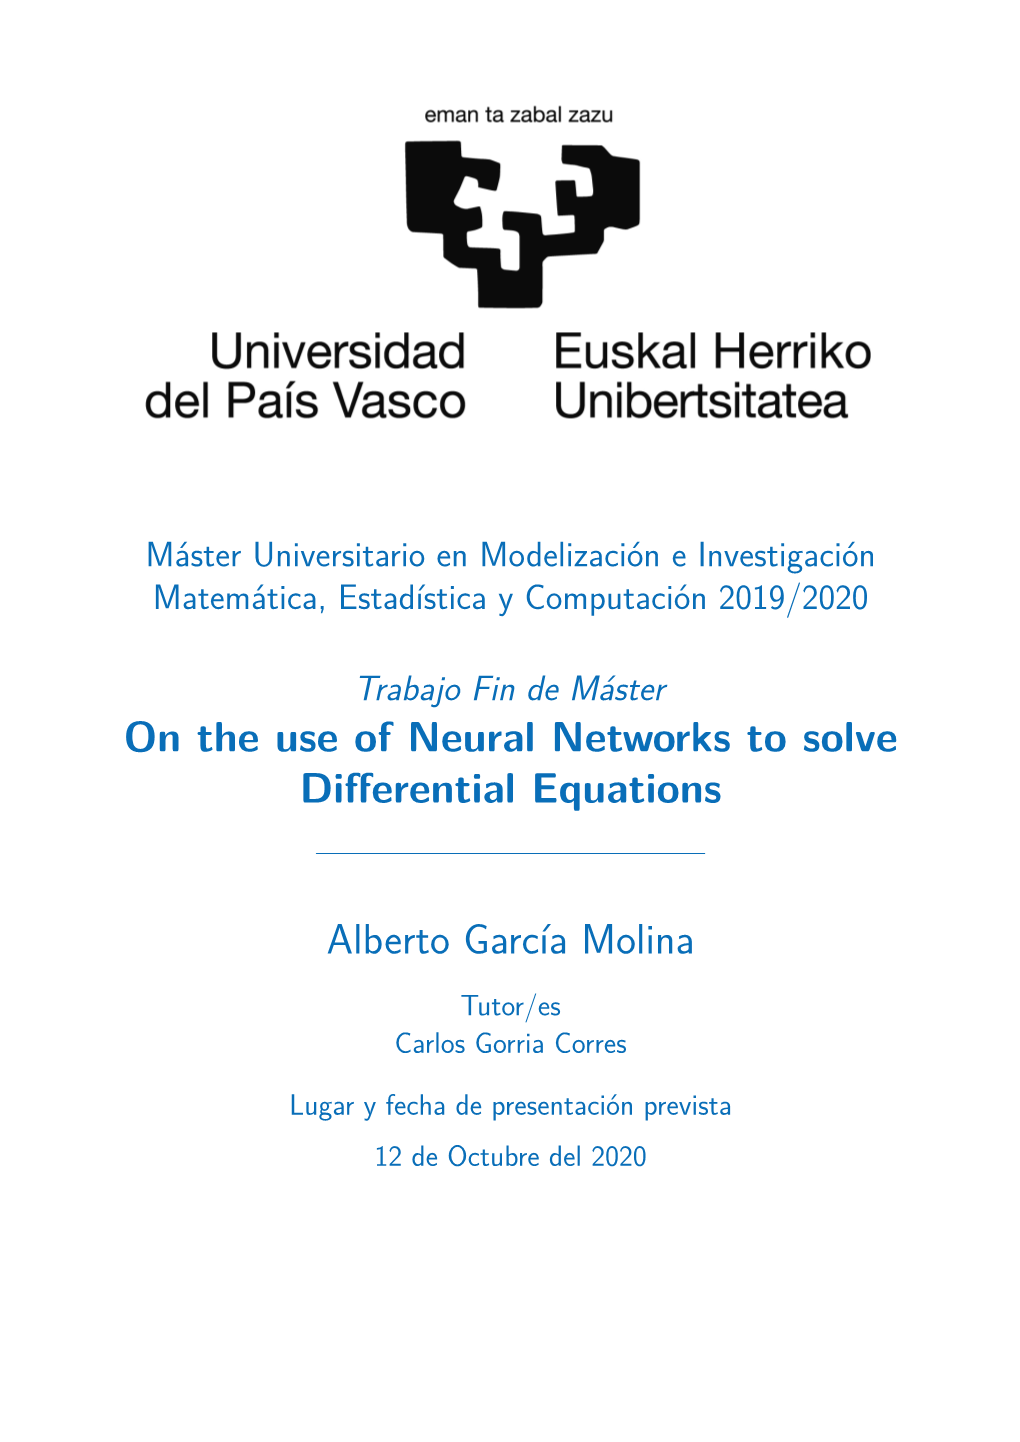 On the Use of Neural Networks to Solve Differential Equations Alberto García Molina